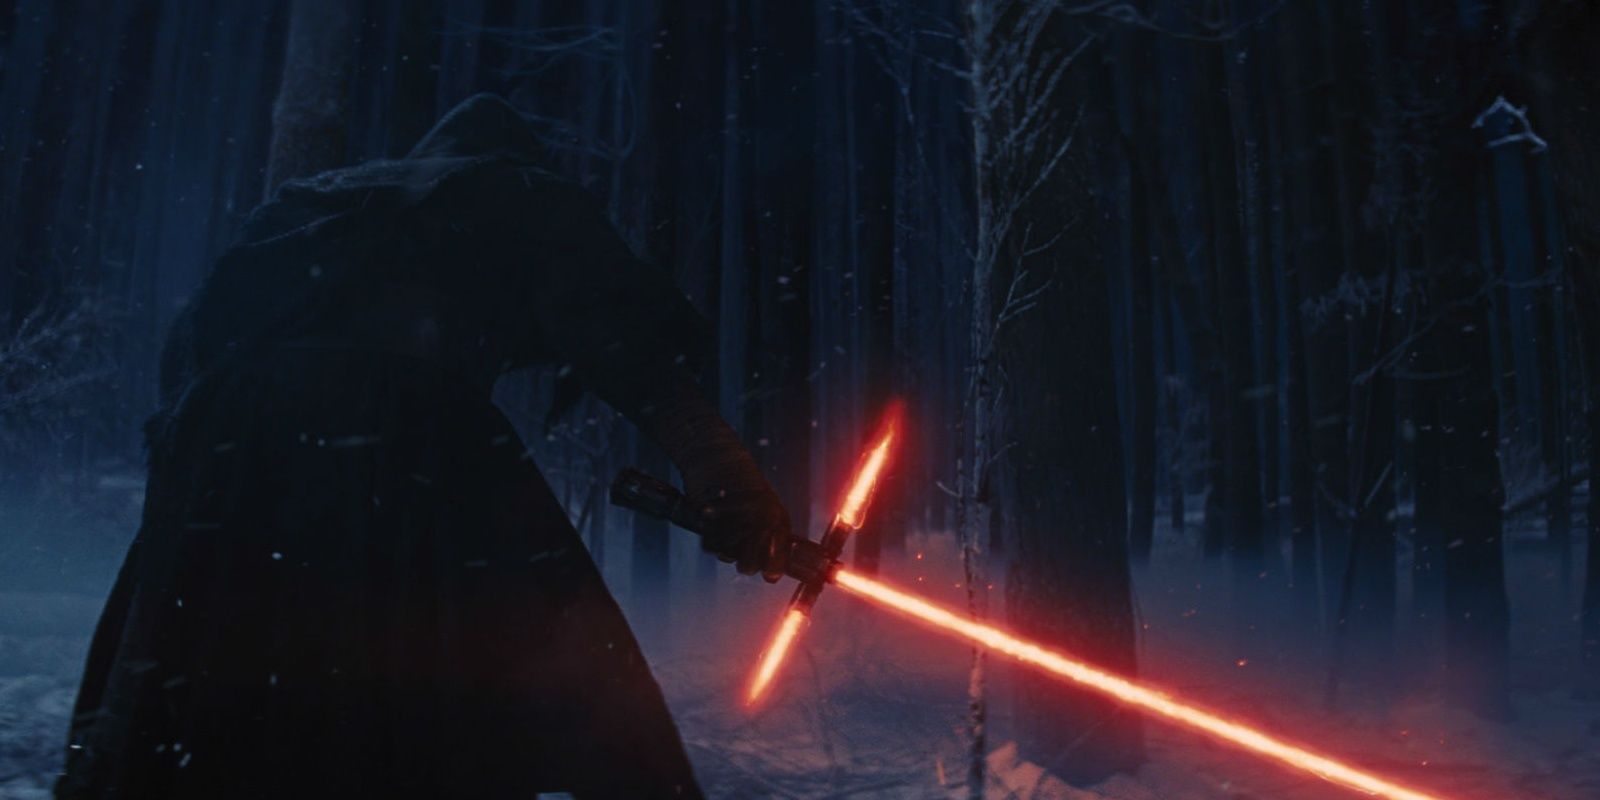 Kylo Ren ignites his lightsaber in The Force Awakens.